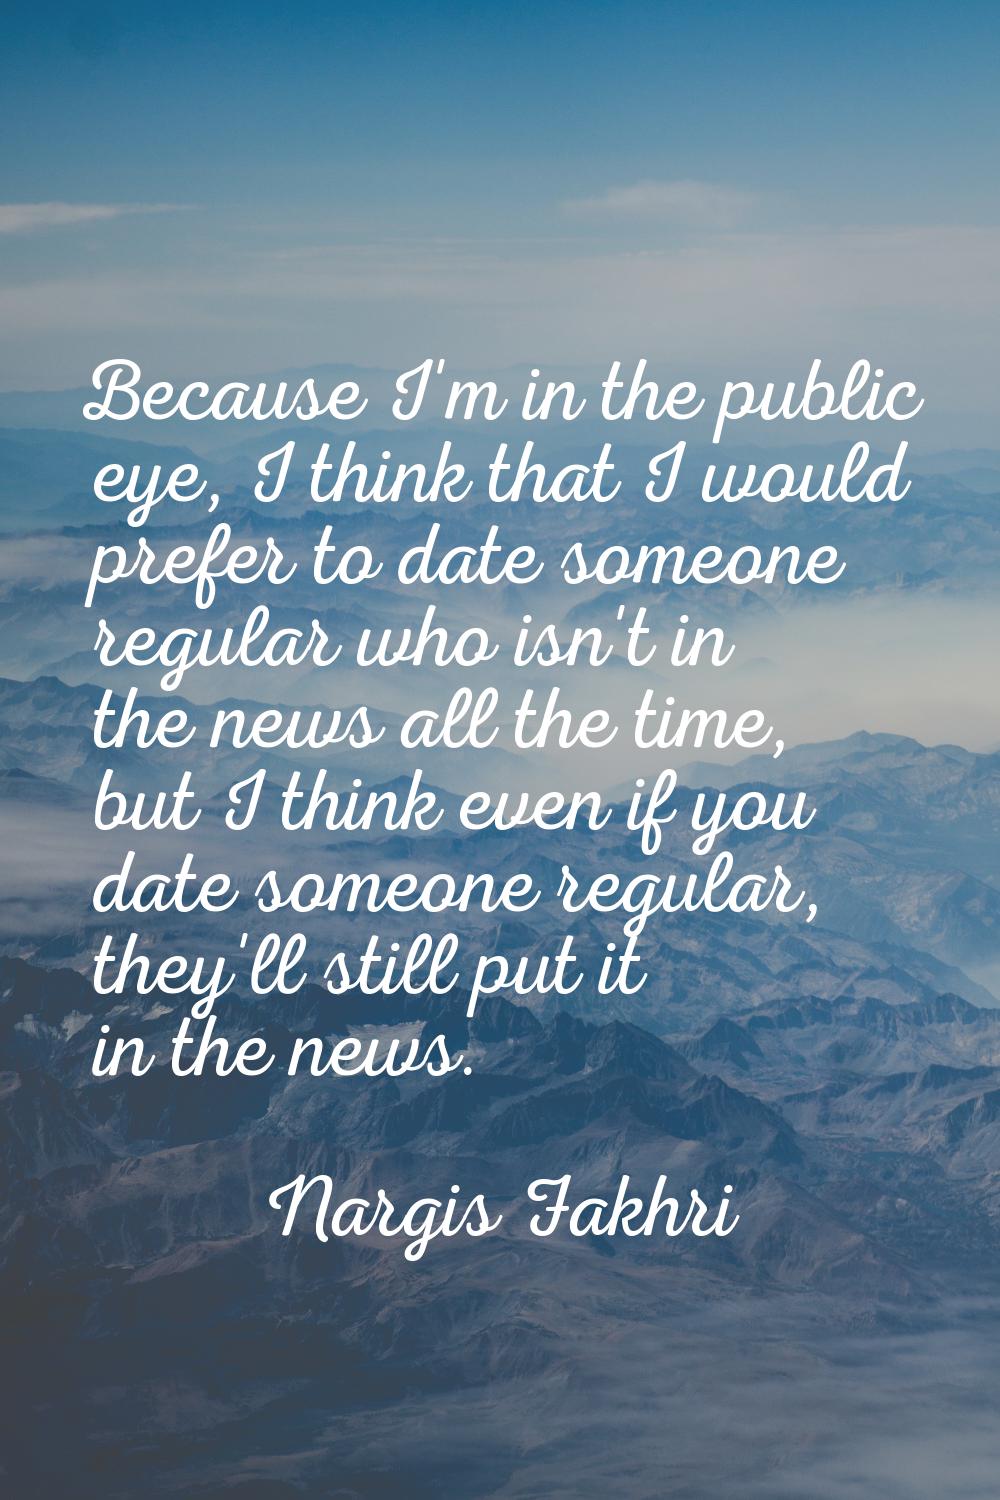 Because I'm in the public eye, I think that I would prefer to date someone regular who isn't in the